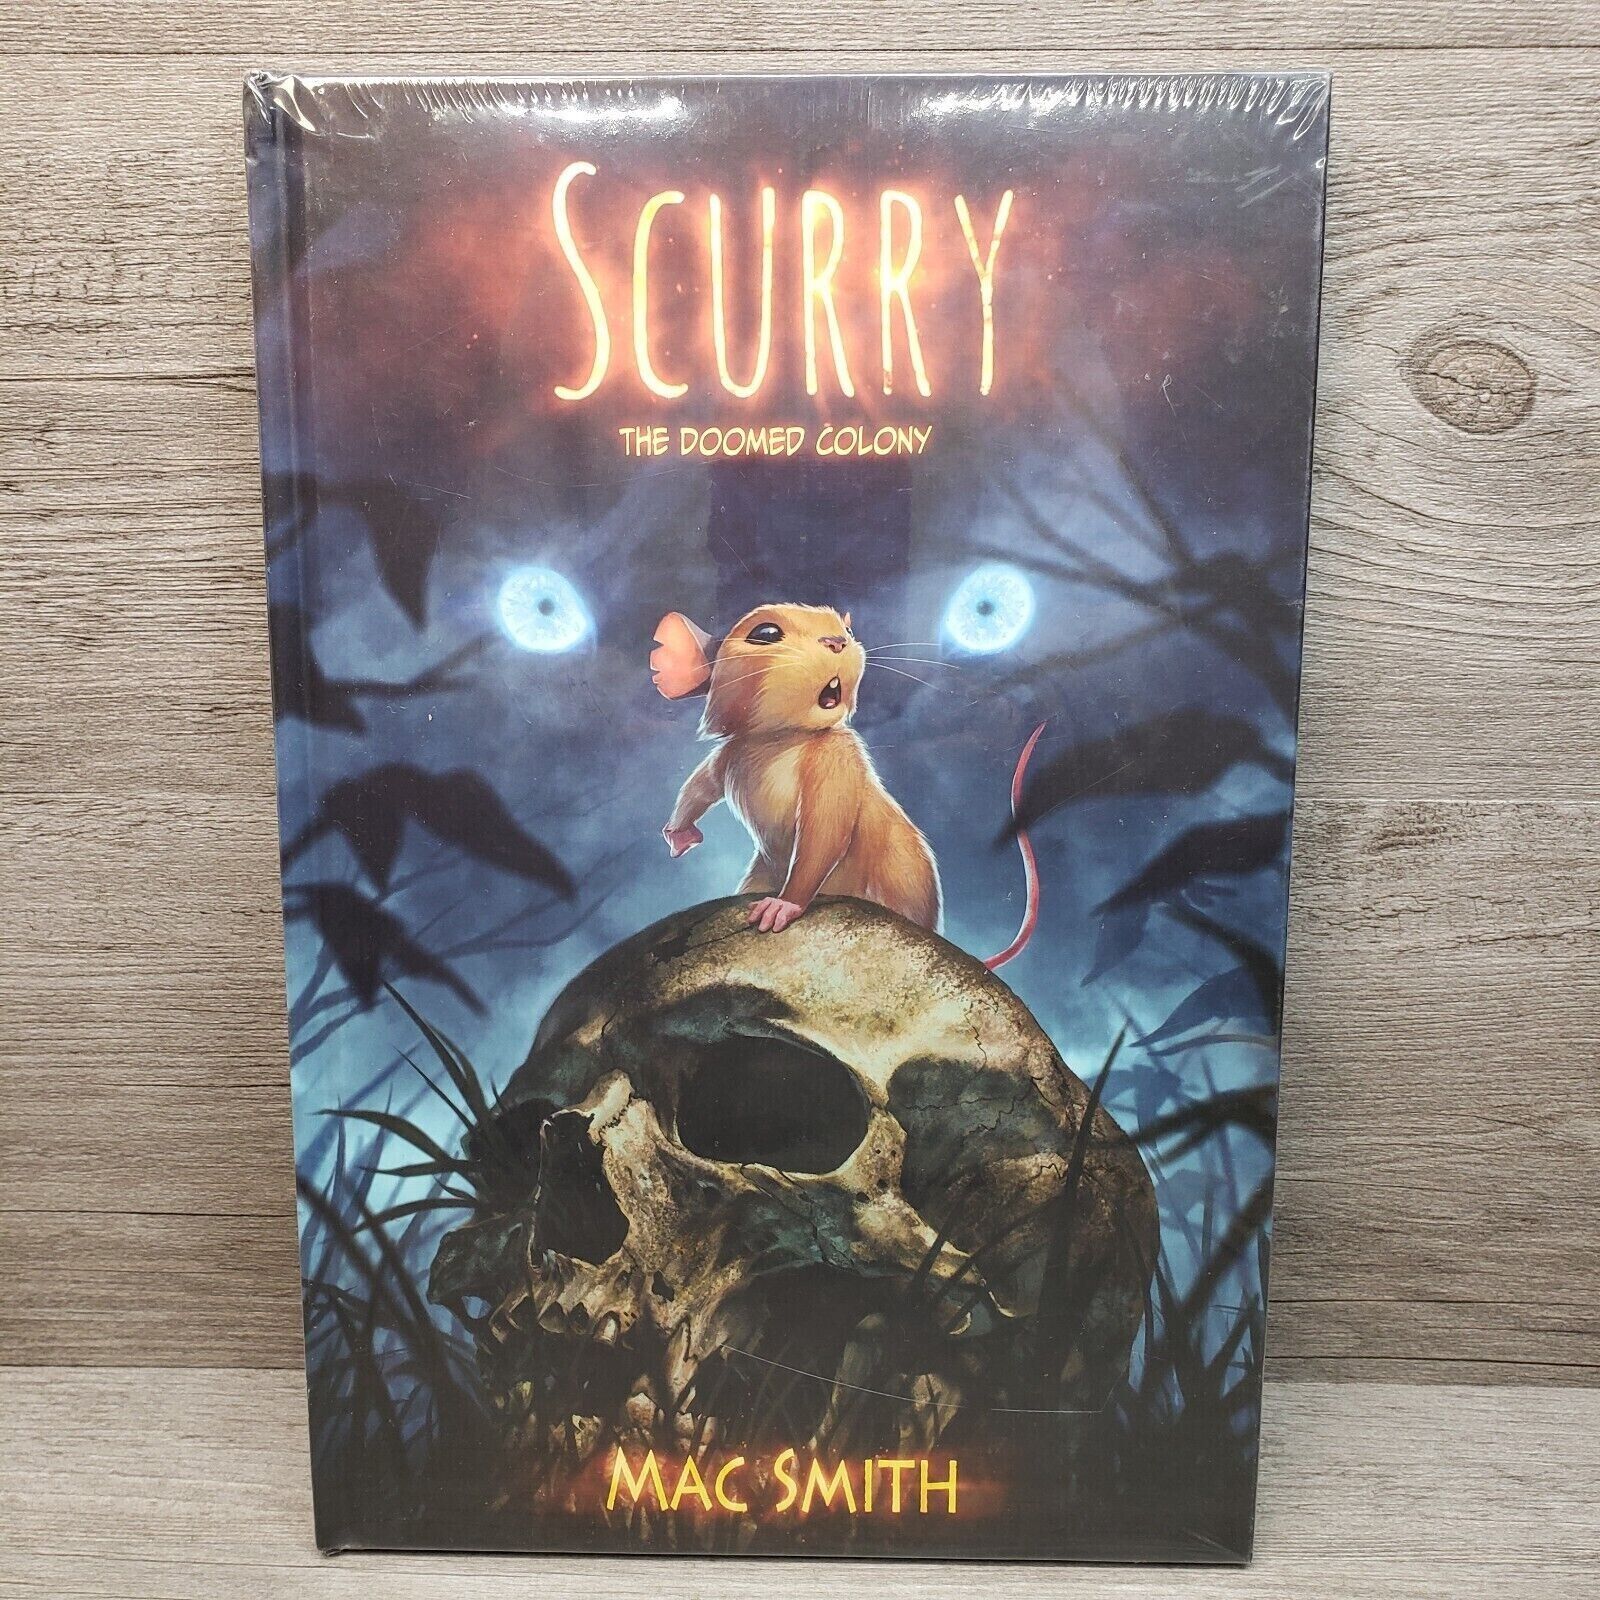 Scurry Book 1 The Doomed Colony: A Post-Apocalyptic Mouse Tale Mac Smith NEW